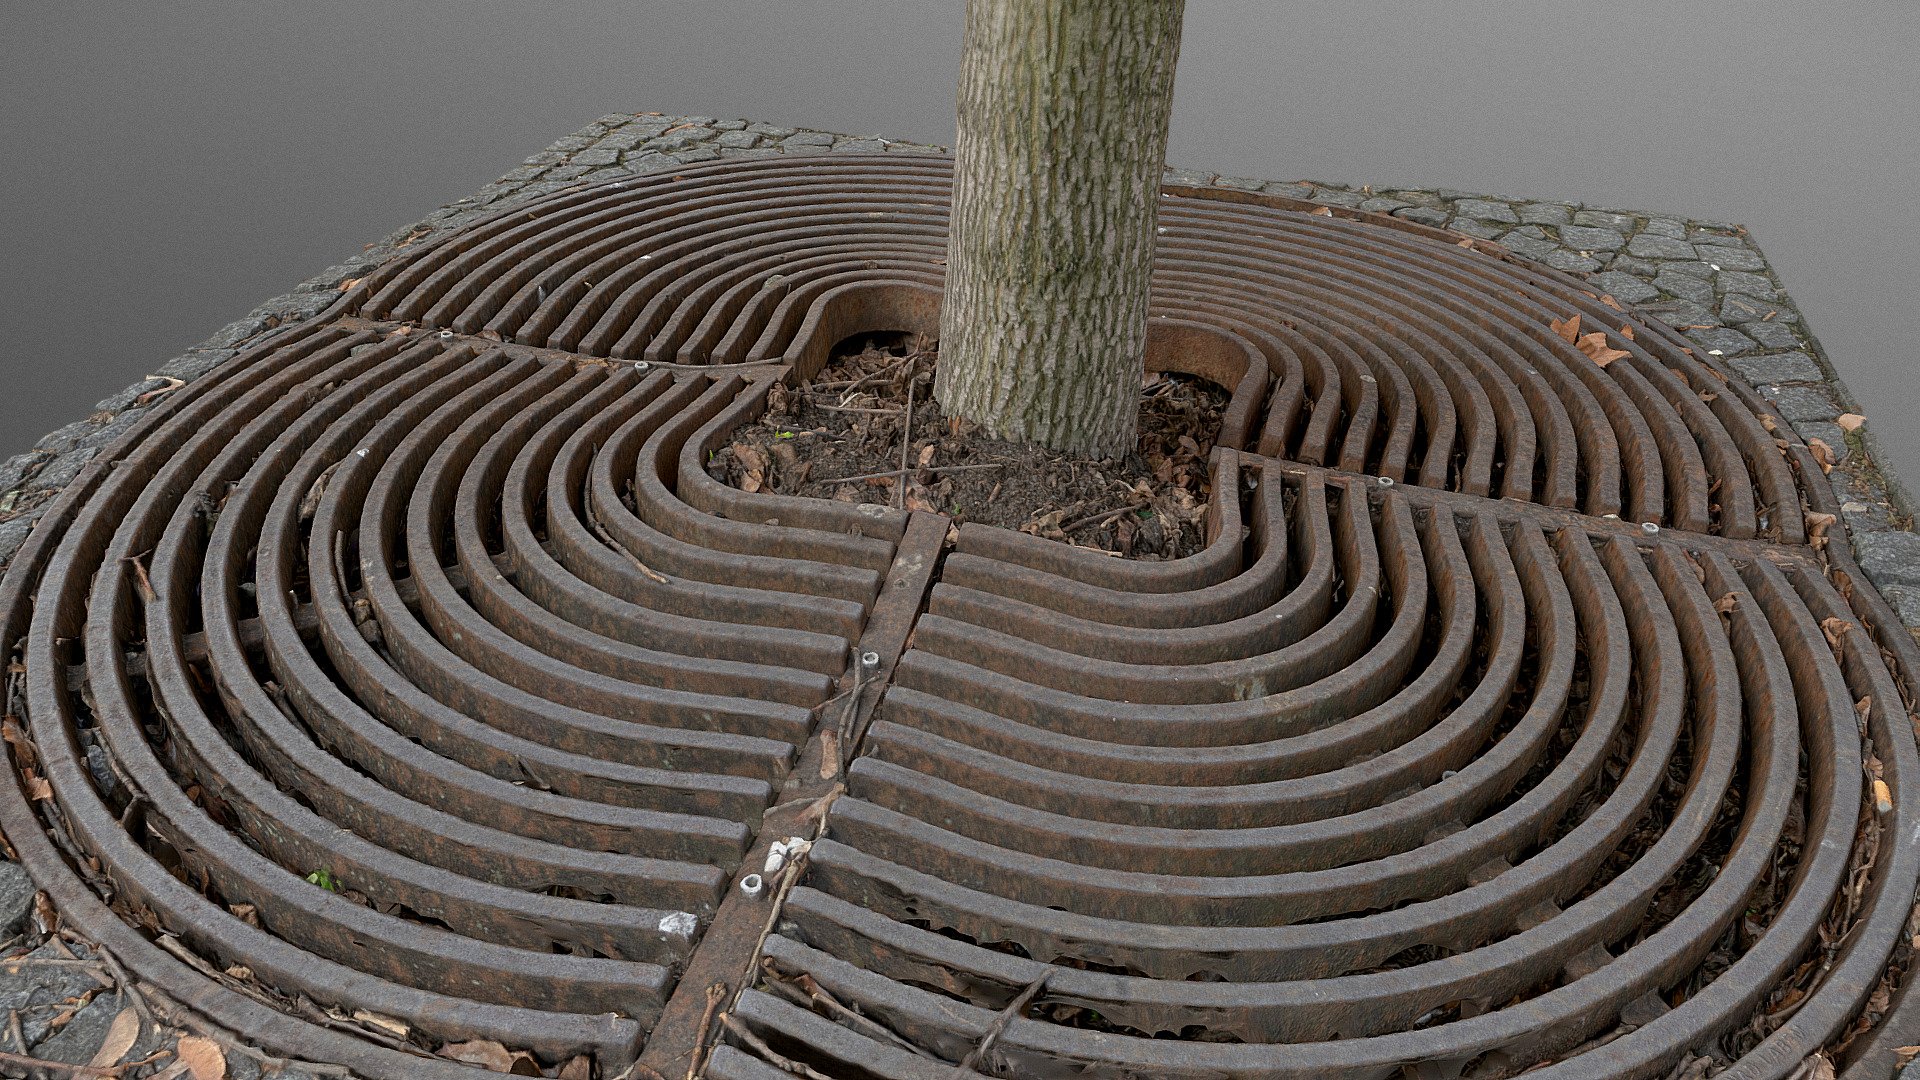 Rounded metal tree grille grate, cast iron tree guard bed tree protection with some urban dirt and rubbish

photogrammetry scan (250x24MP), 2x16K textures - Round metal tree grille grate guard - Buy Royalty Free 3D model by matousekfoto 3d model